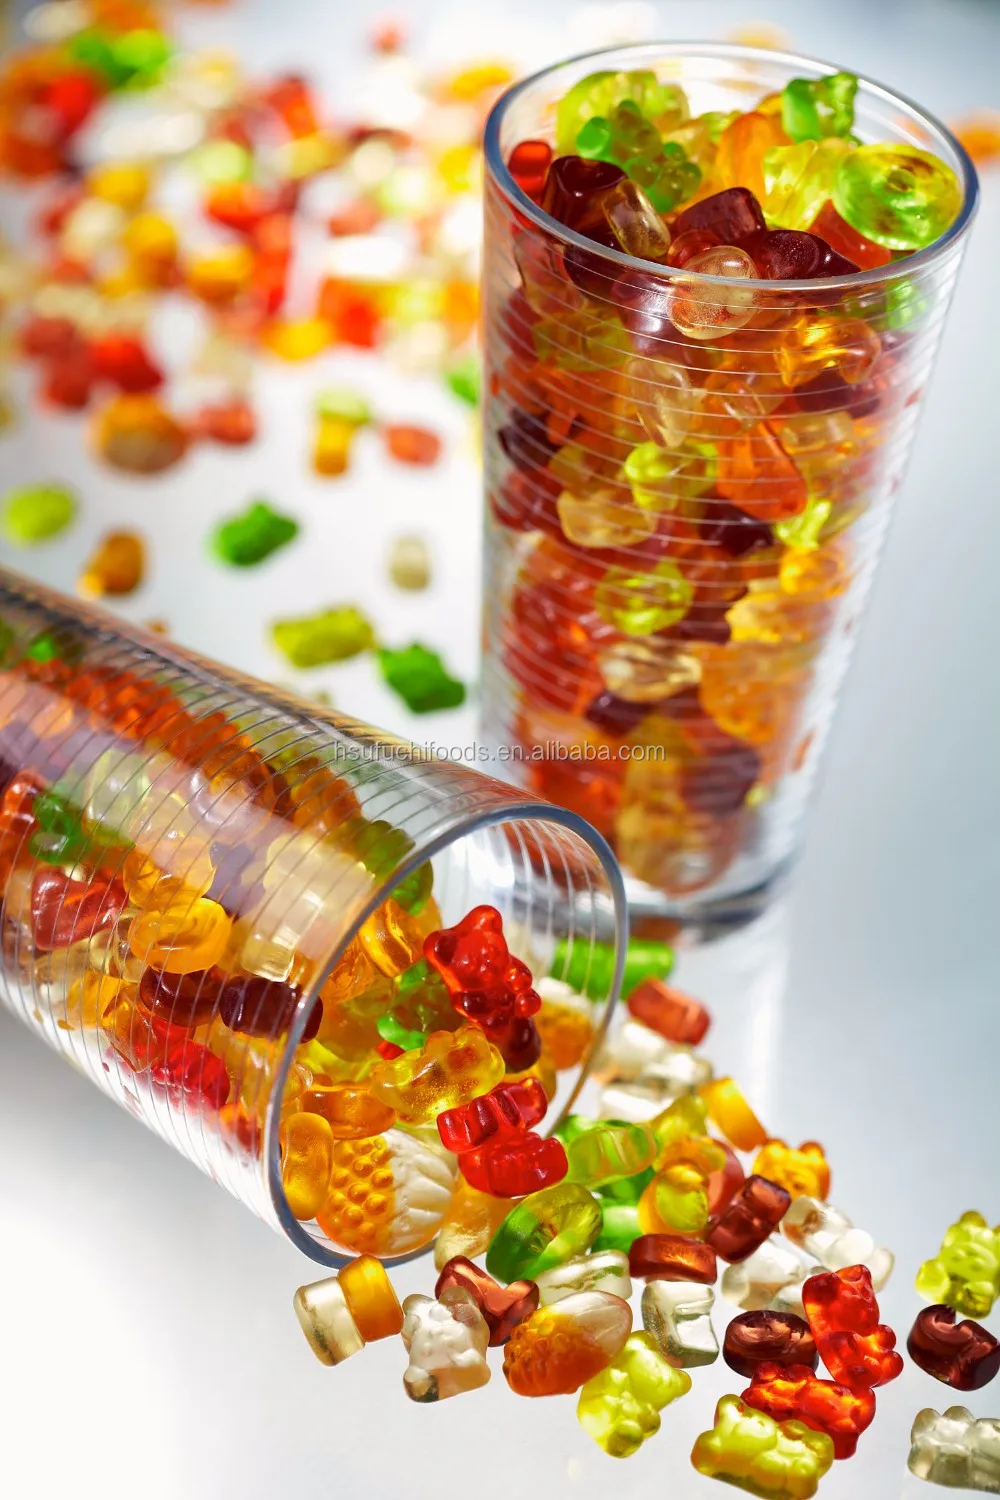 Delectable Delights: Crafting a Scrumptious Candy Corn Trail Mix Recipe for Fall Festivities